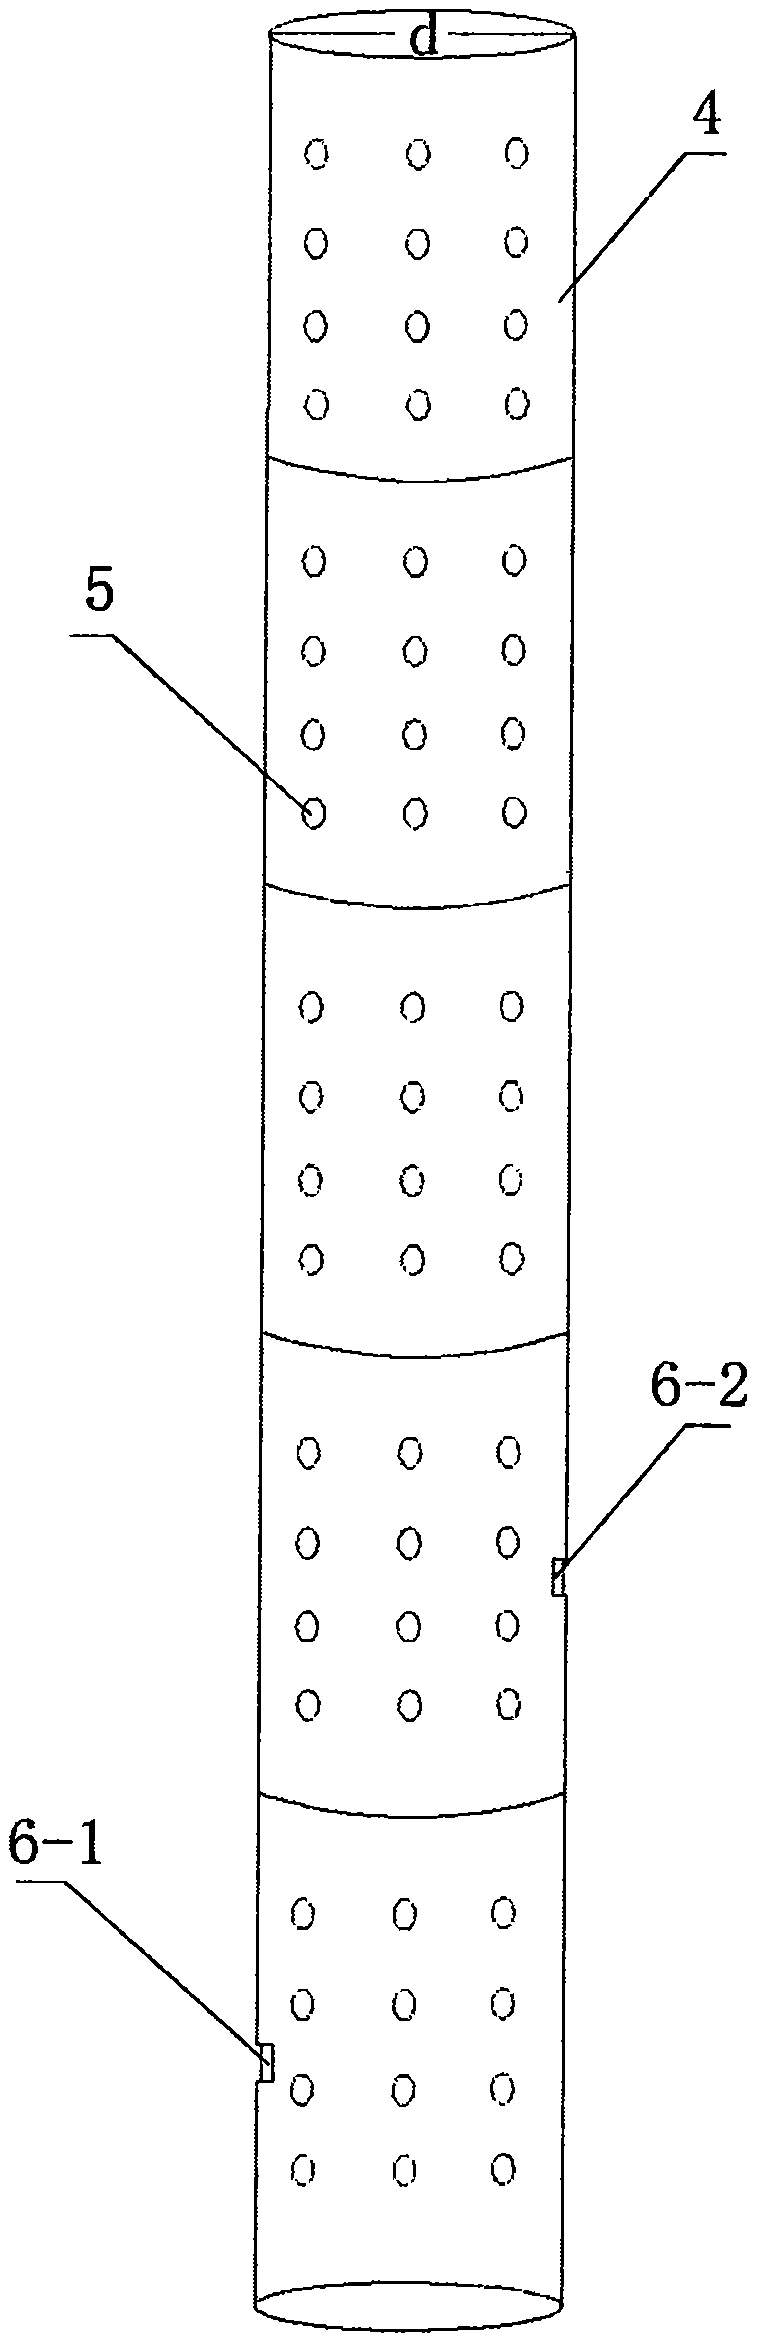 A method for drawing water from seepage wells in arid and semi-arid areas